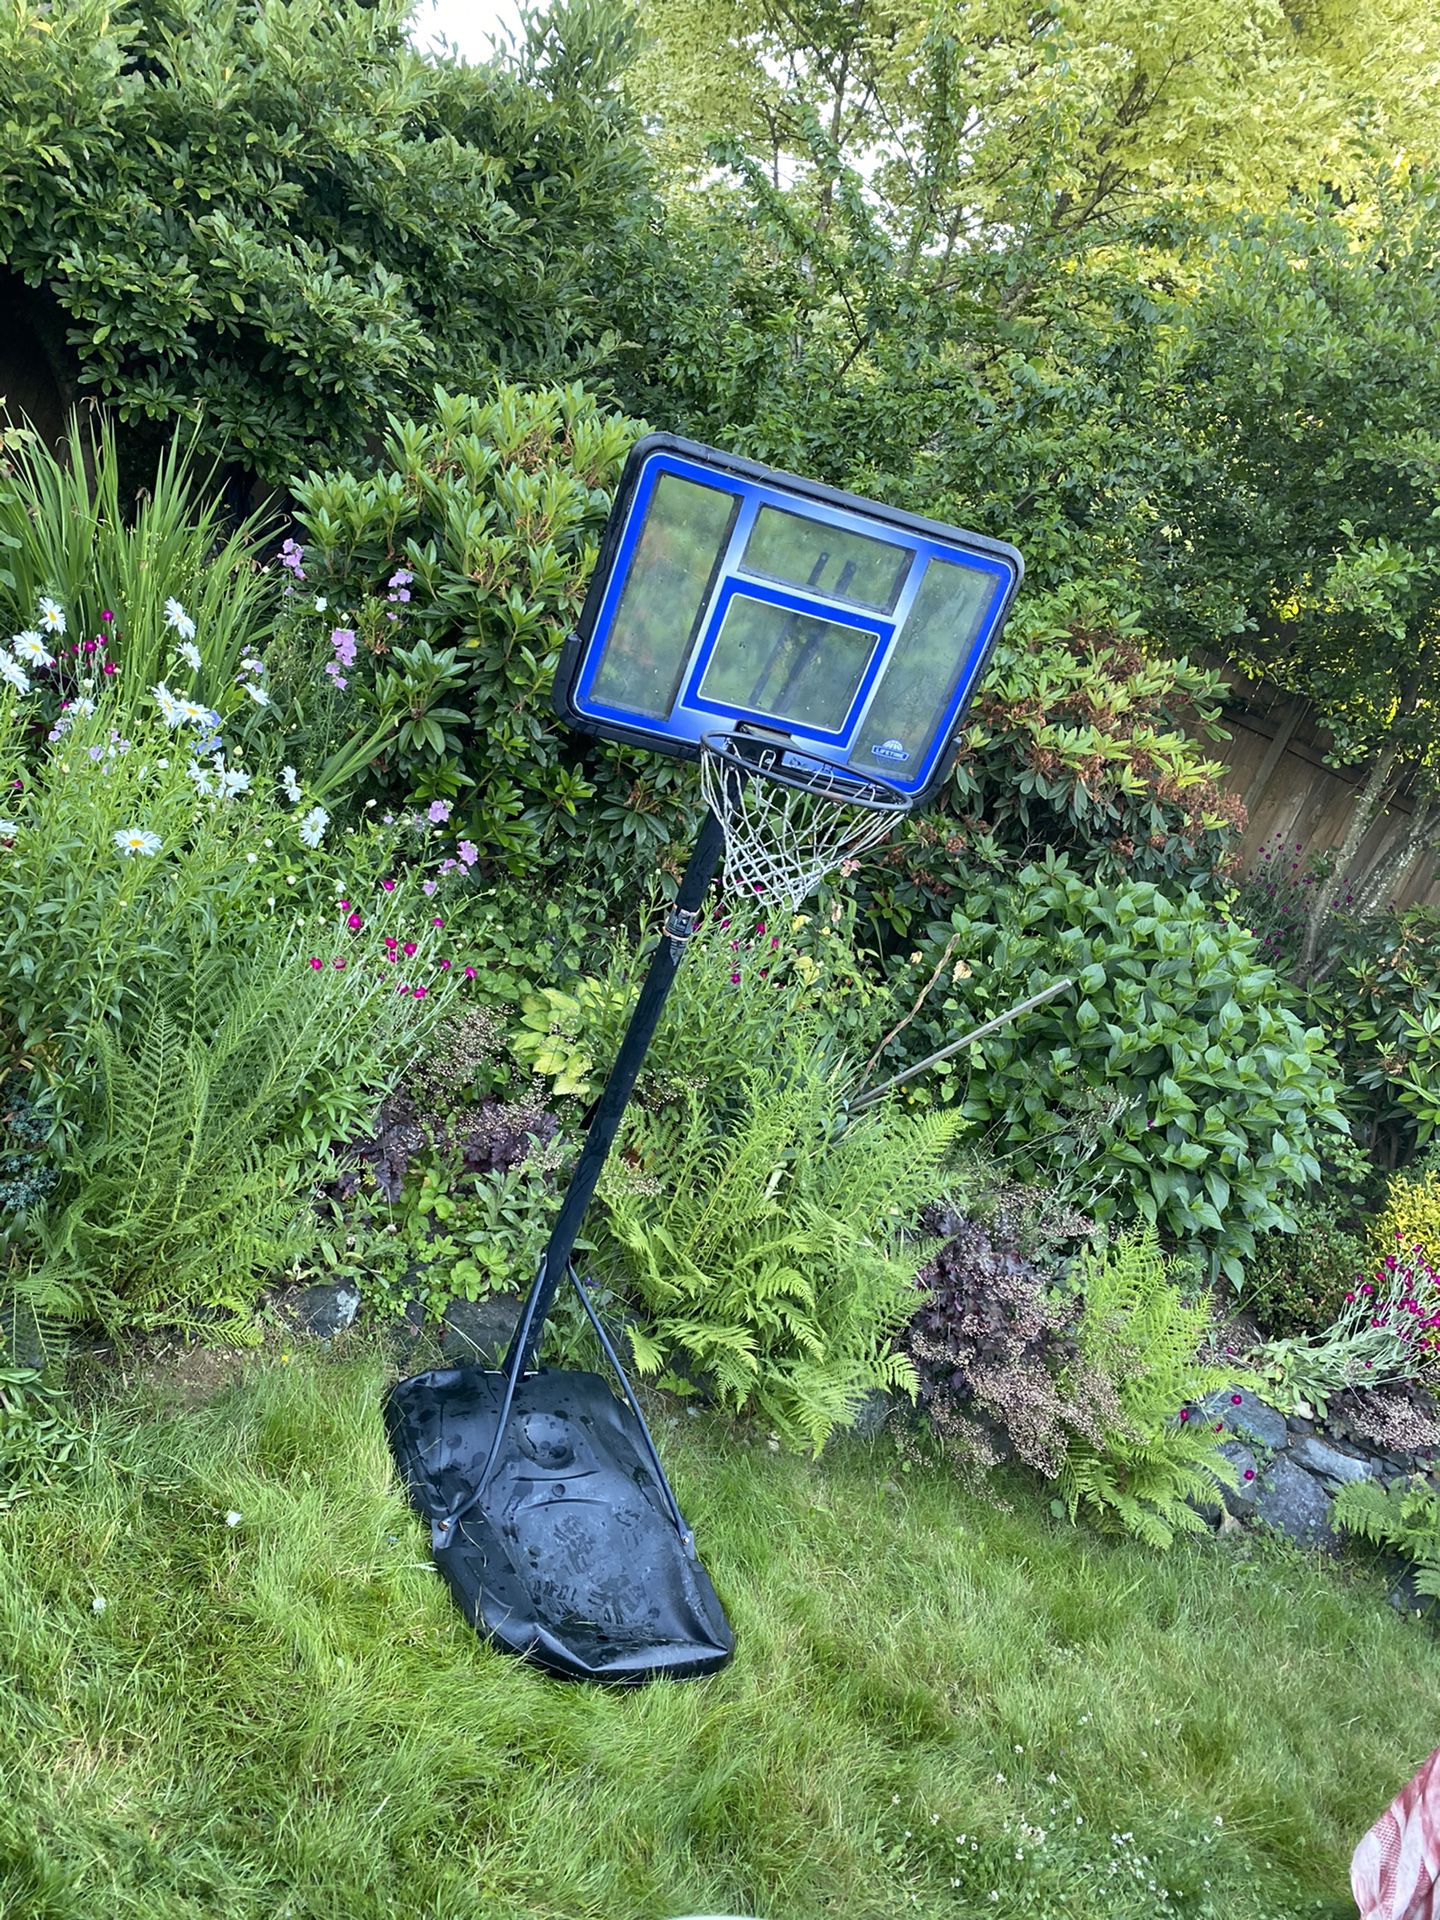 Lifetime basketball hoop. 10 ft to the ring